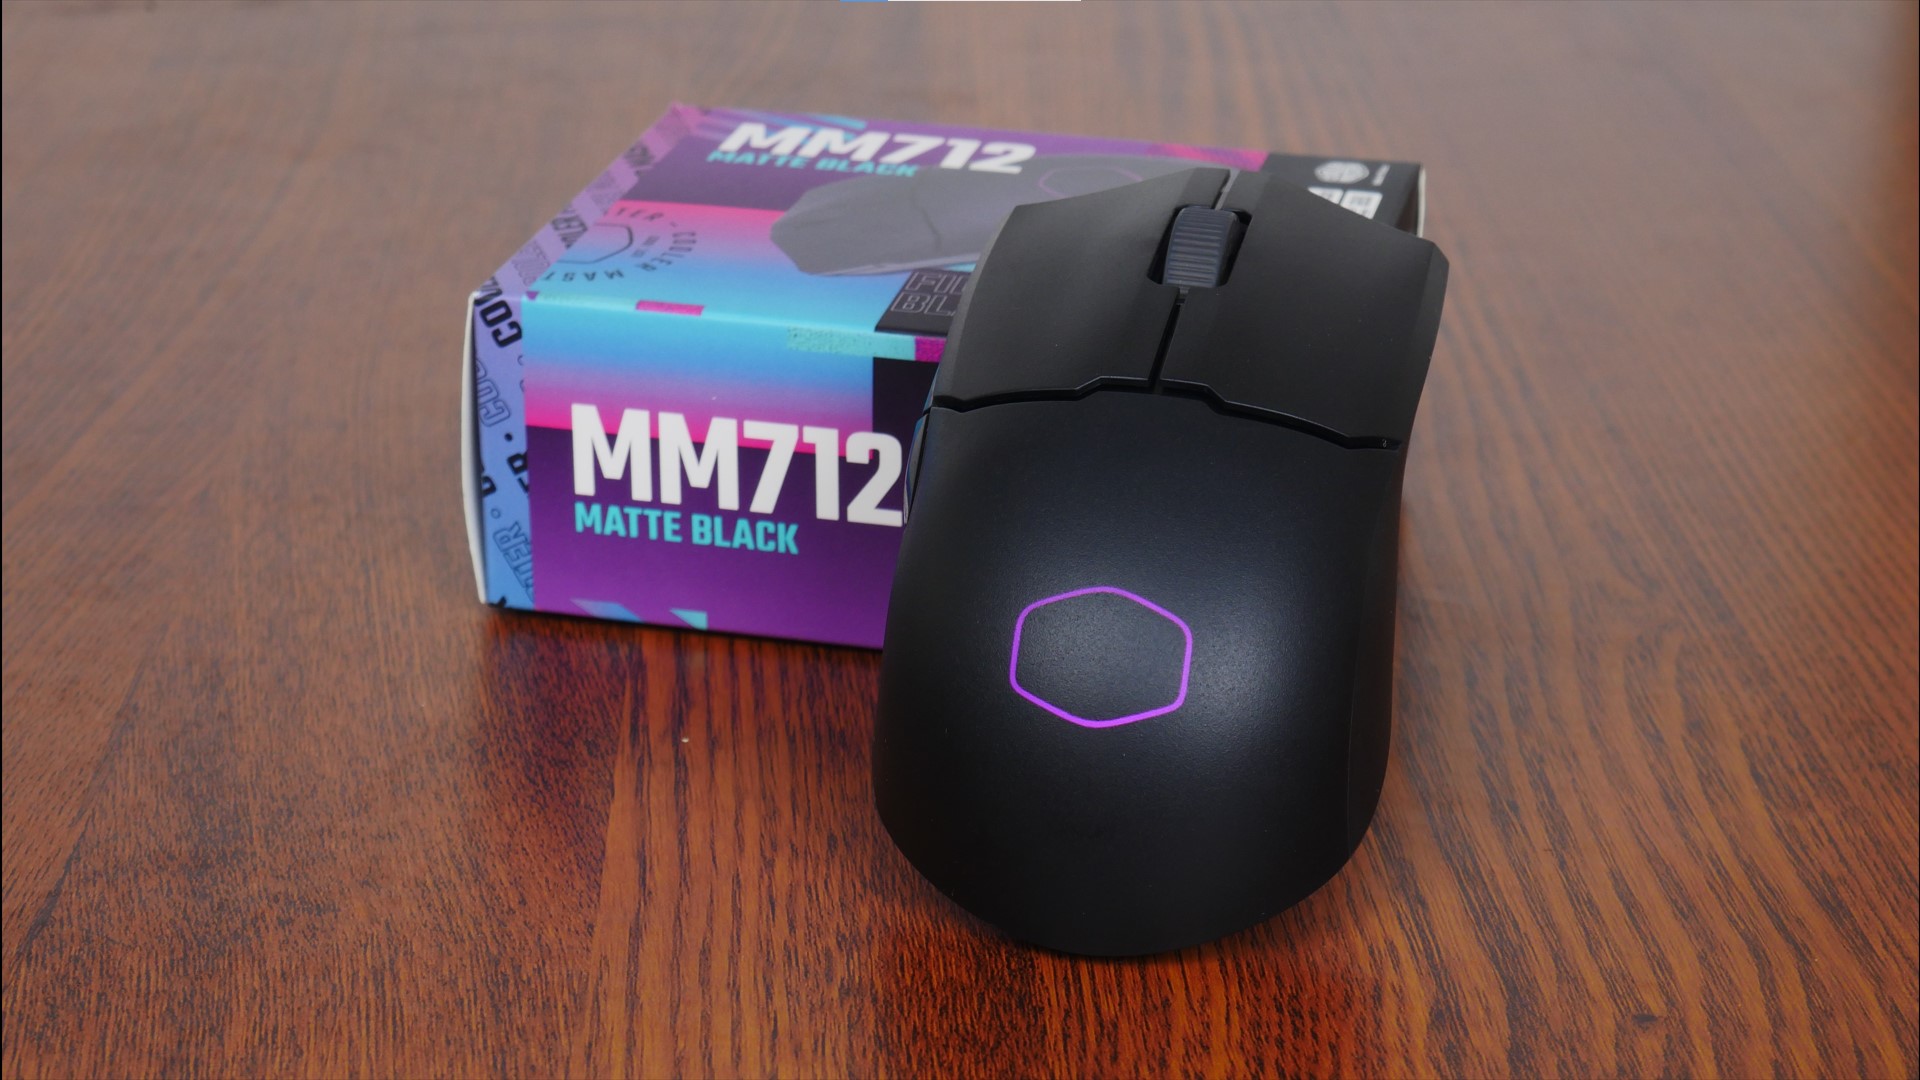 Cooler Master MM712 Featured Image